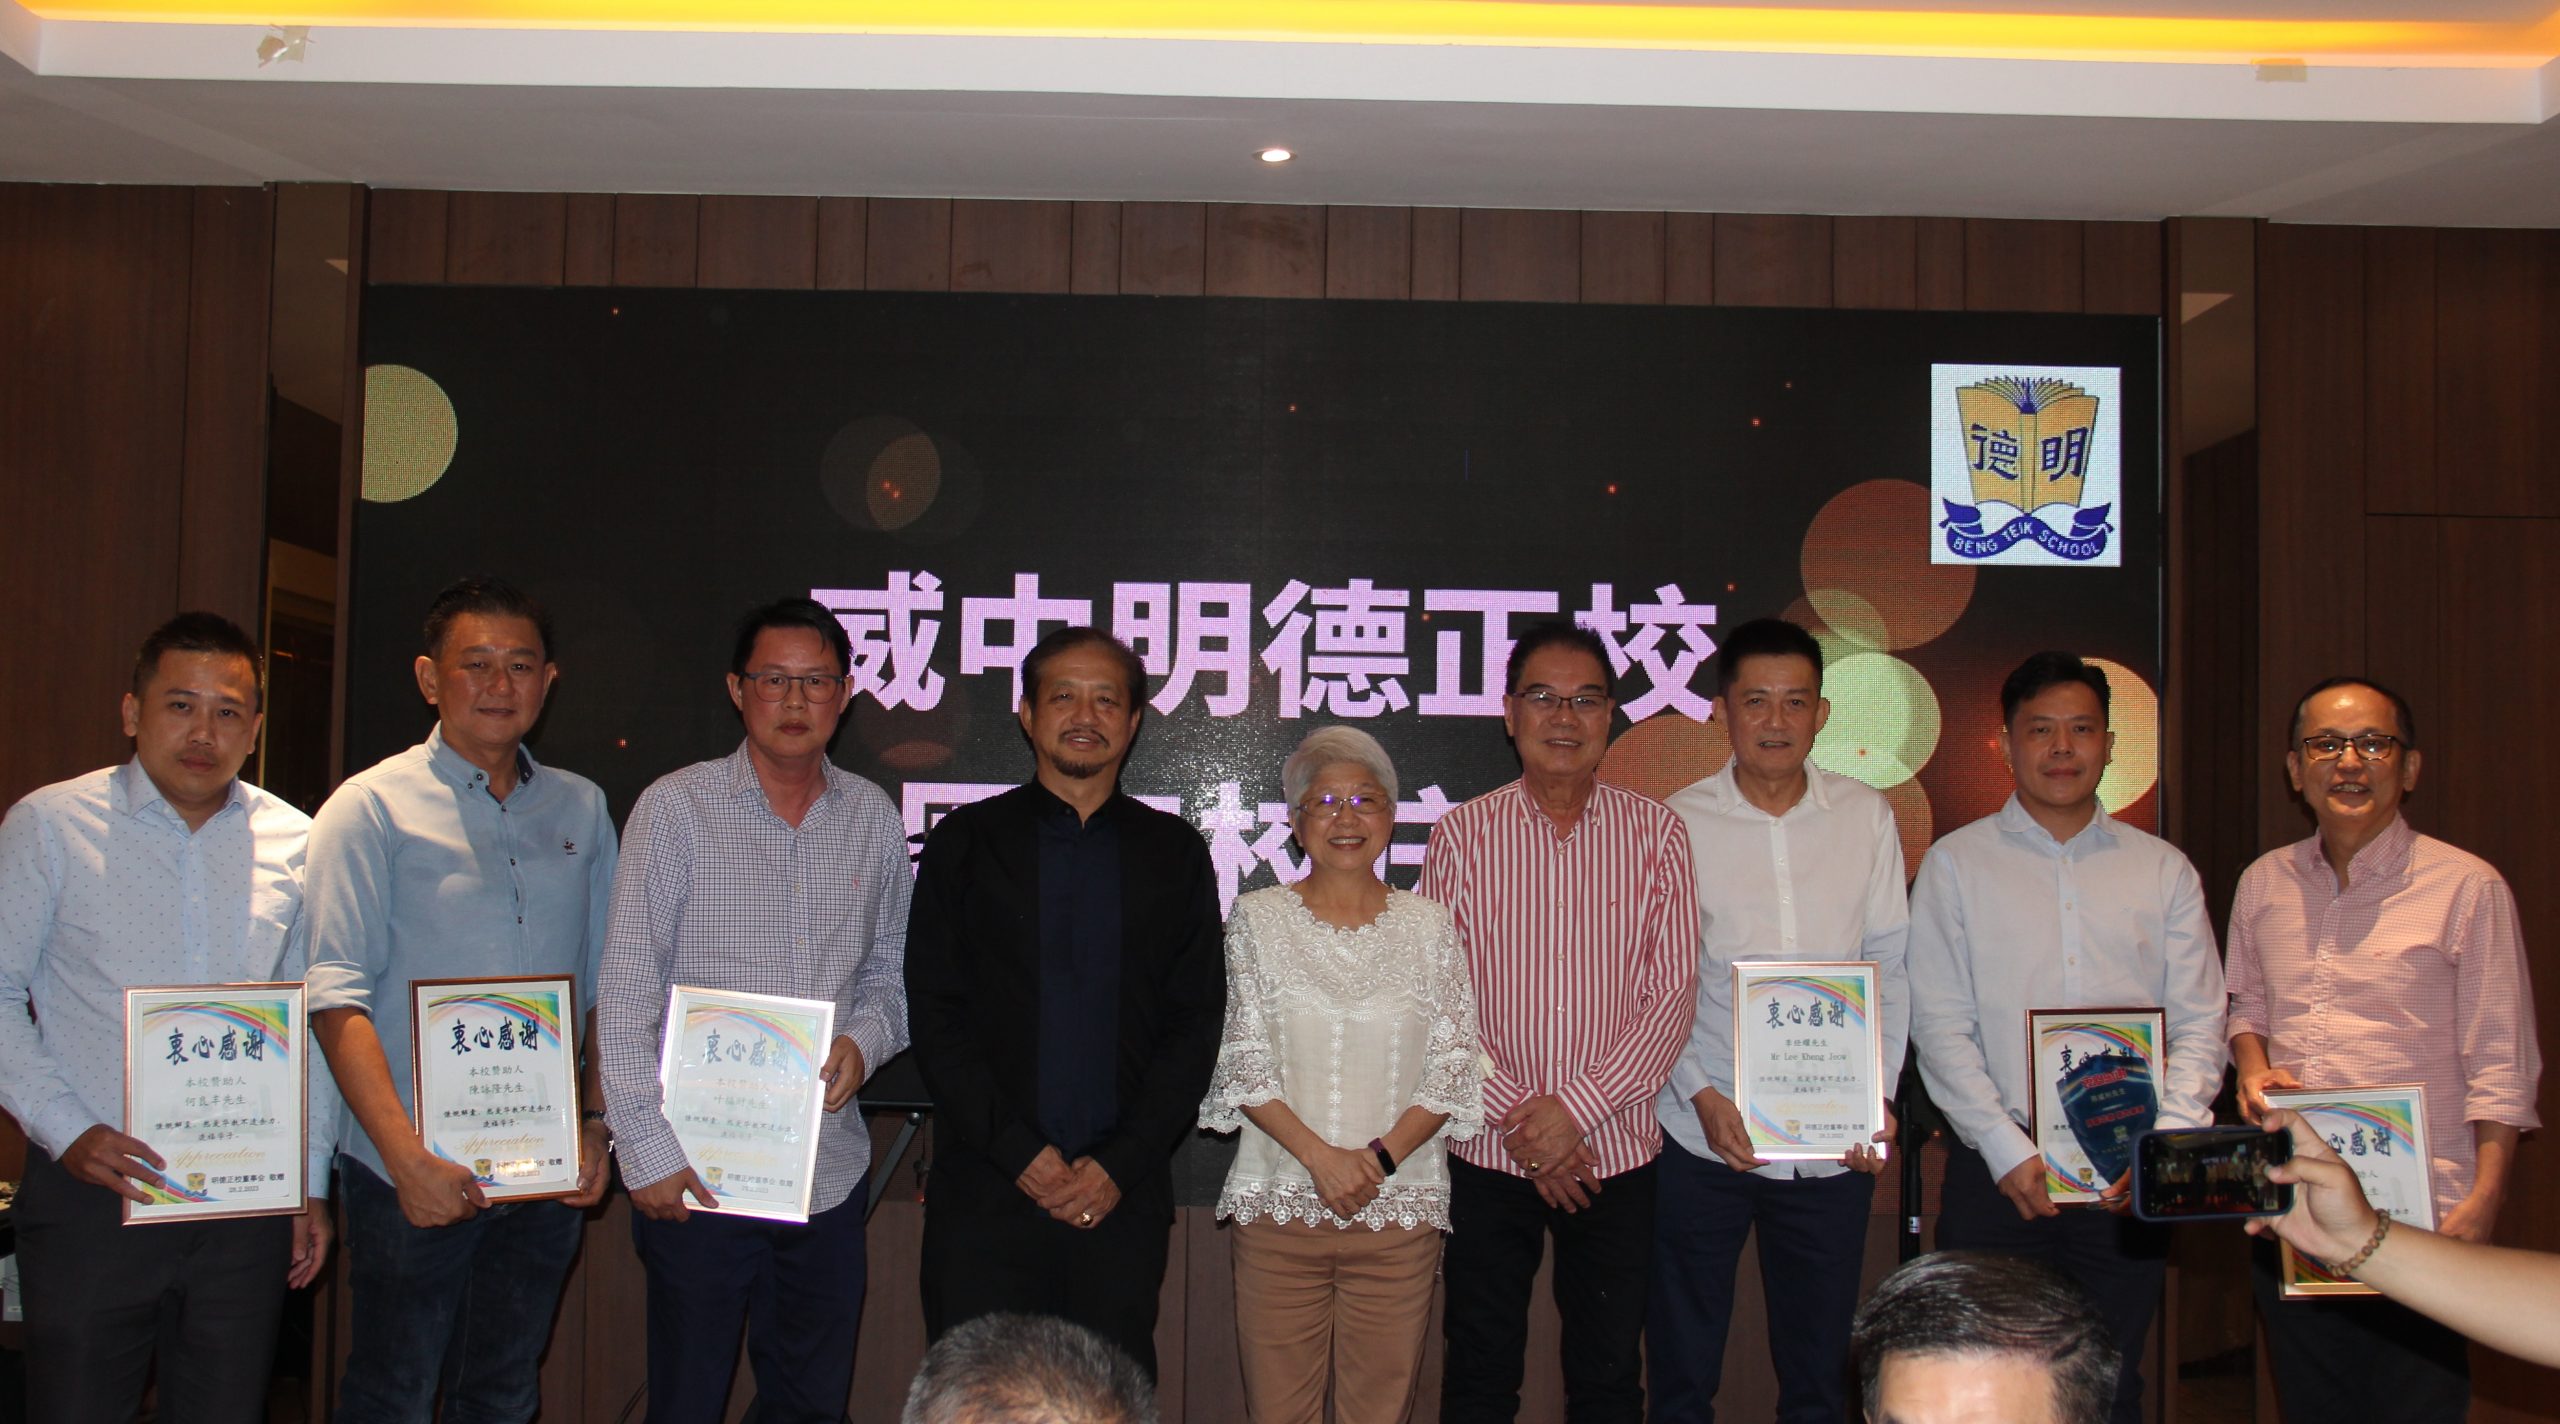 Senior Dato' Huang Cairong also presented souvenirs to the new directors. From left, lawyer Ho Leong Fong, Tan Wing Long (represented by Chen Yongchang), Ye Fucai, senior Dato' Huang Cairong, Zhang Ying, Dato' Sri Xie Guopei, Lee King Yew, Chen Weili, Lim Zhenhuang (represented by Wu Shenhong).